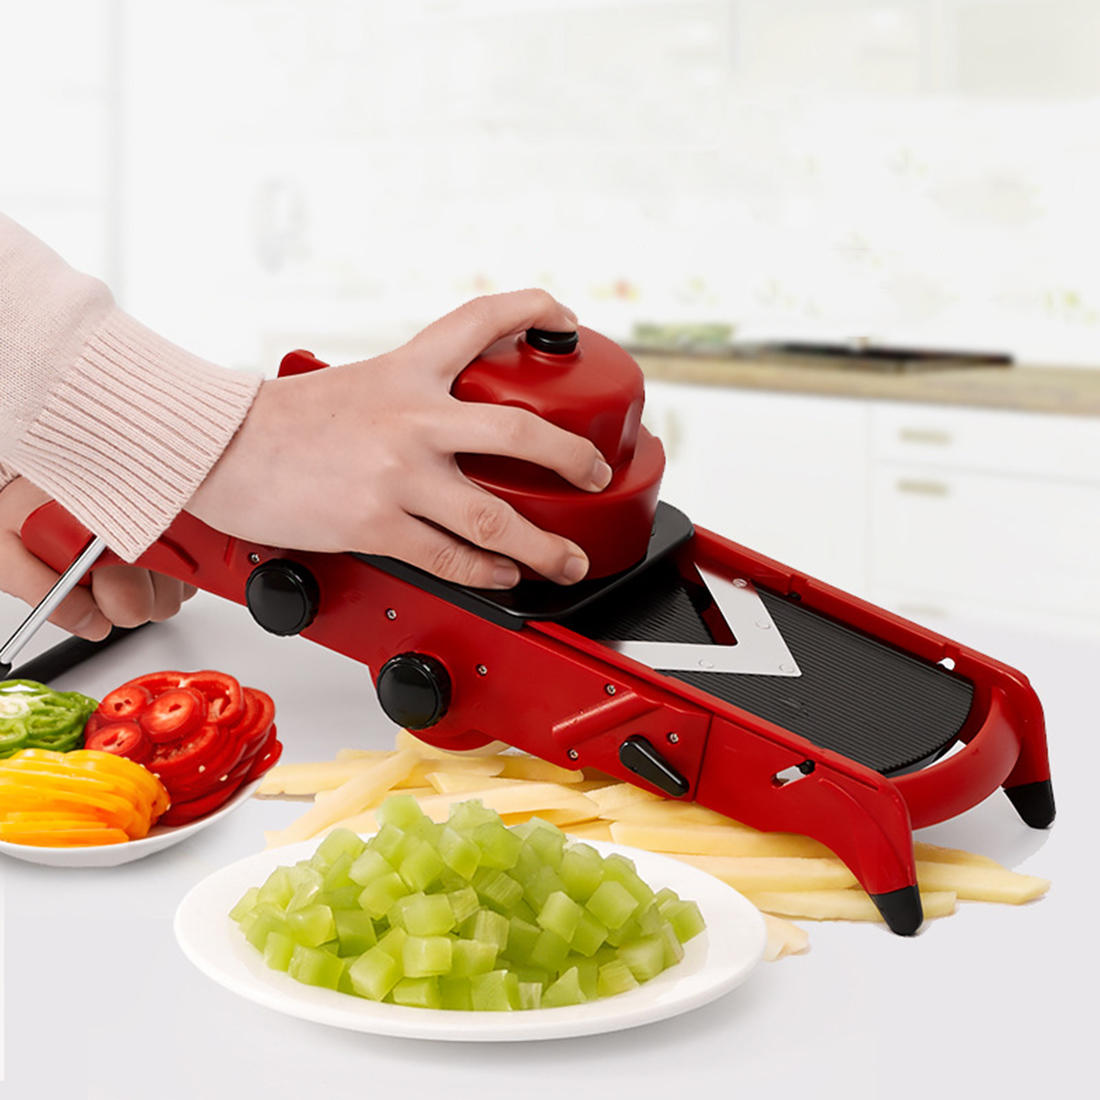 Creative Red Slicer Vegetable Fruit Cutter With Stainless Steel Blade Manual Potato Peeler Carrot Grater Kitchen Tools G